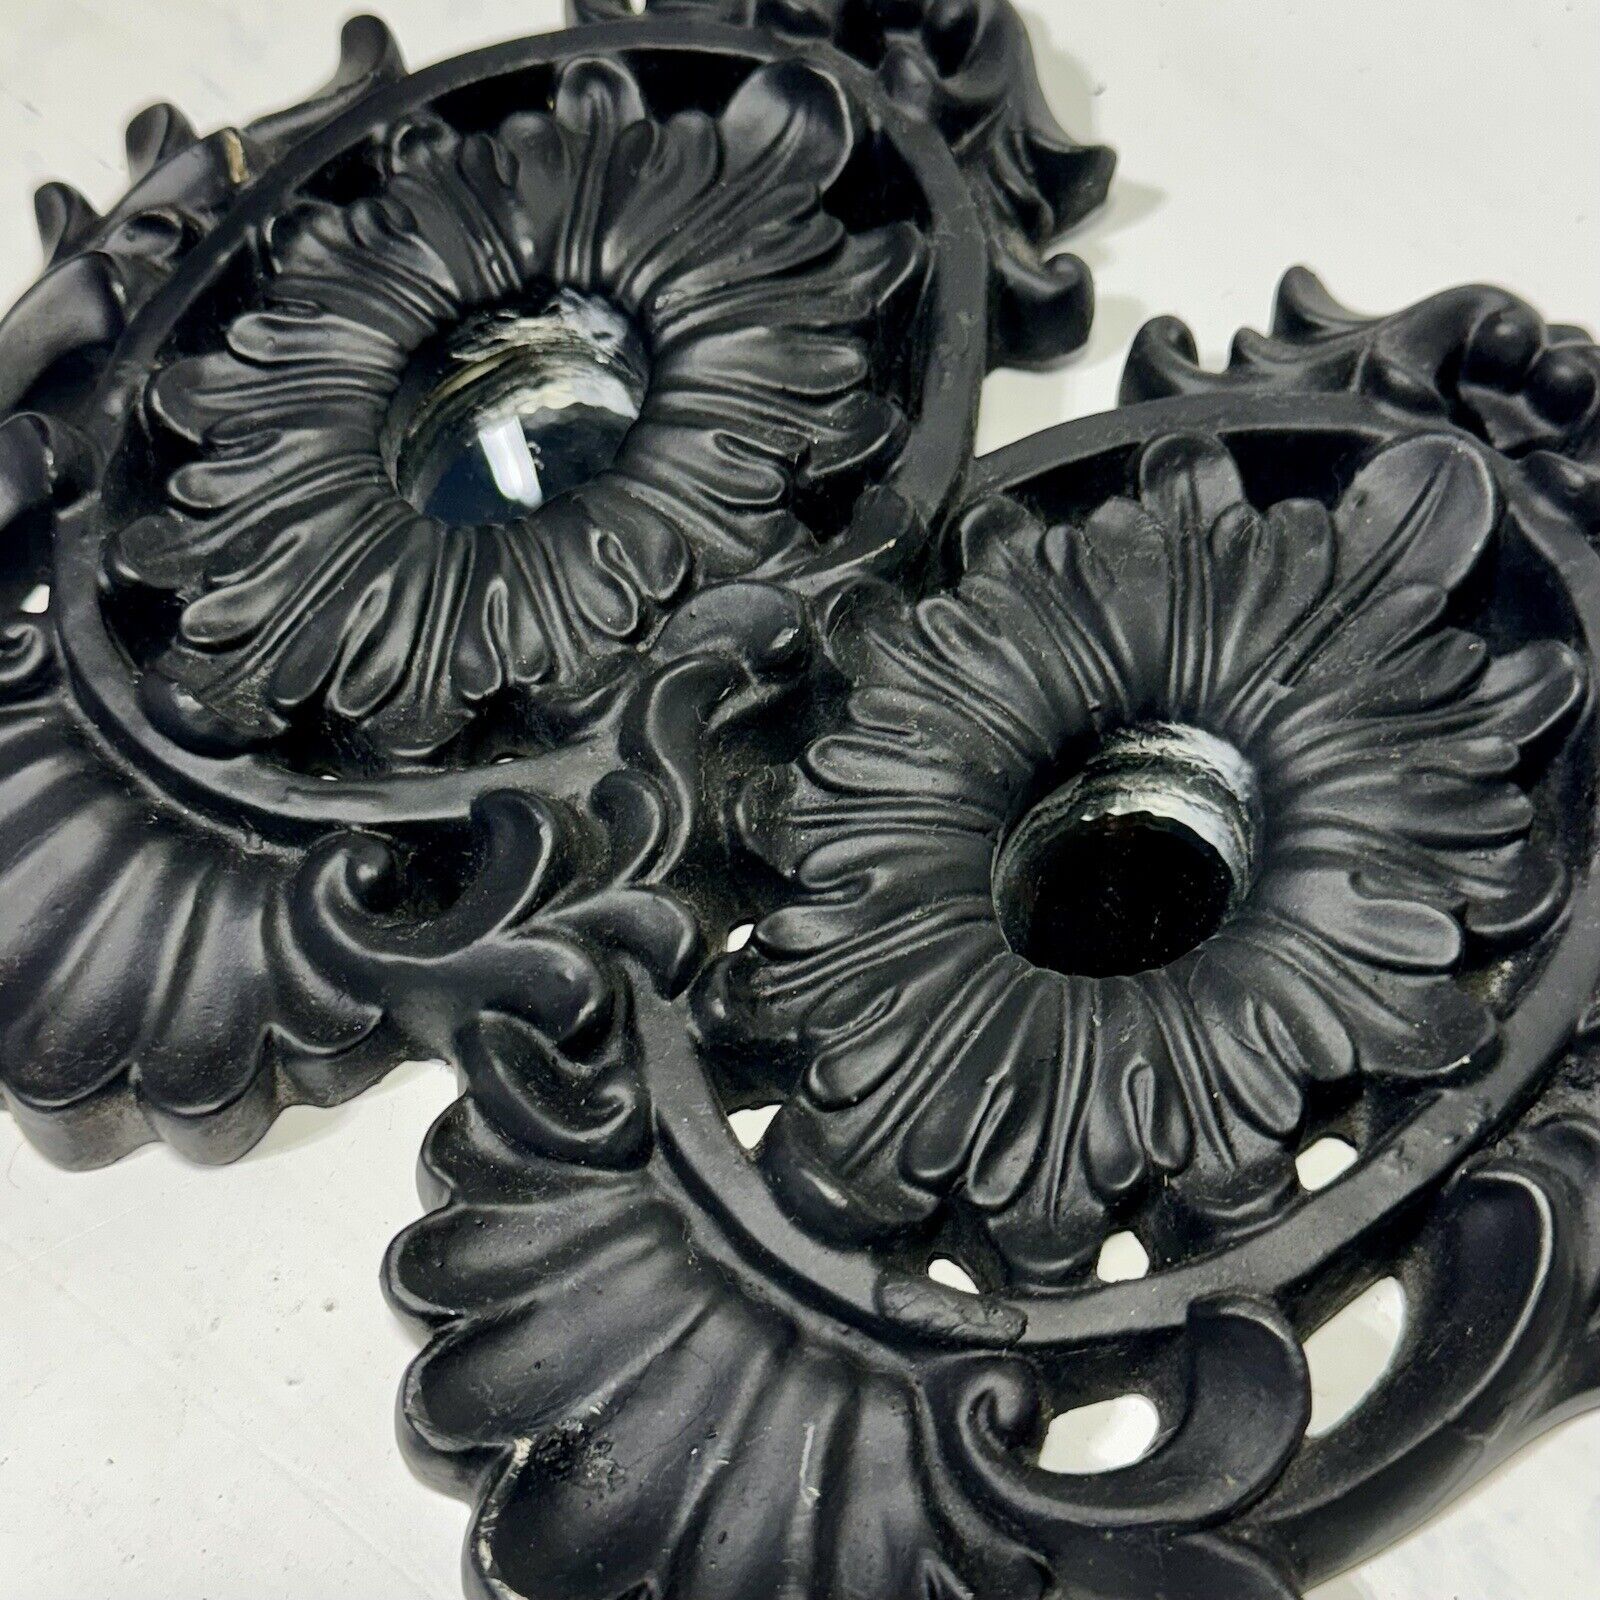 Vintage Ornate Black Wall Decor With Small Mirrors Plaster 9” x 7.5” Heavy